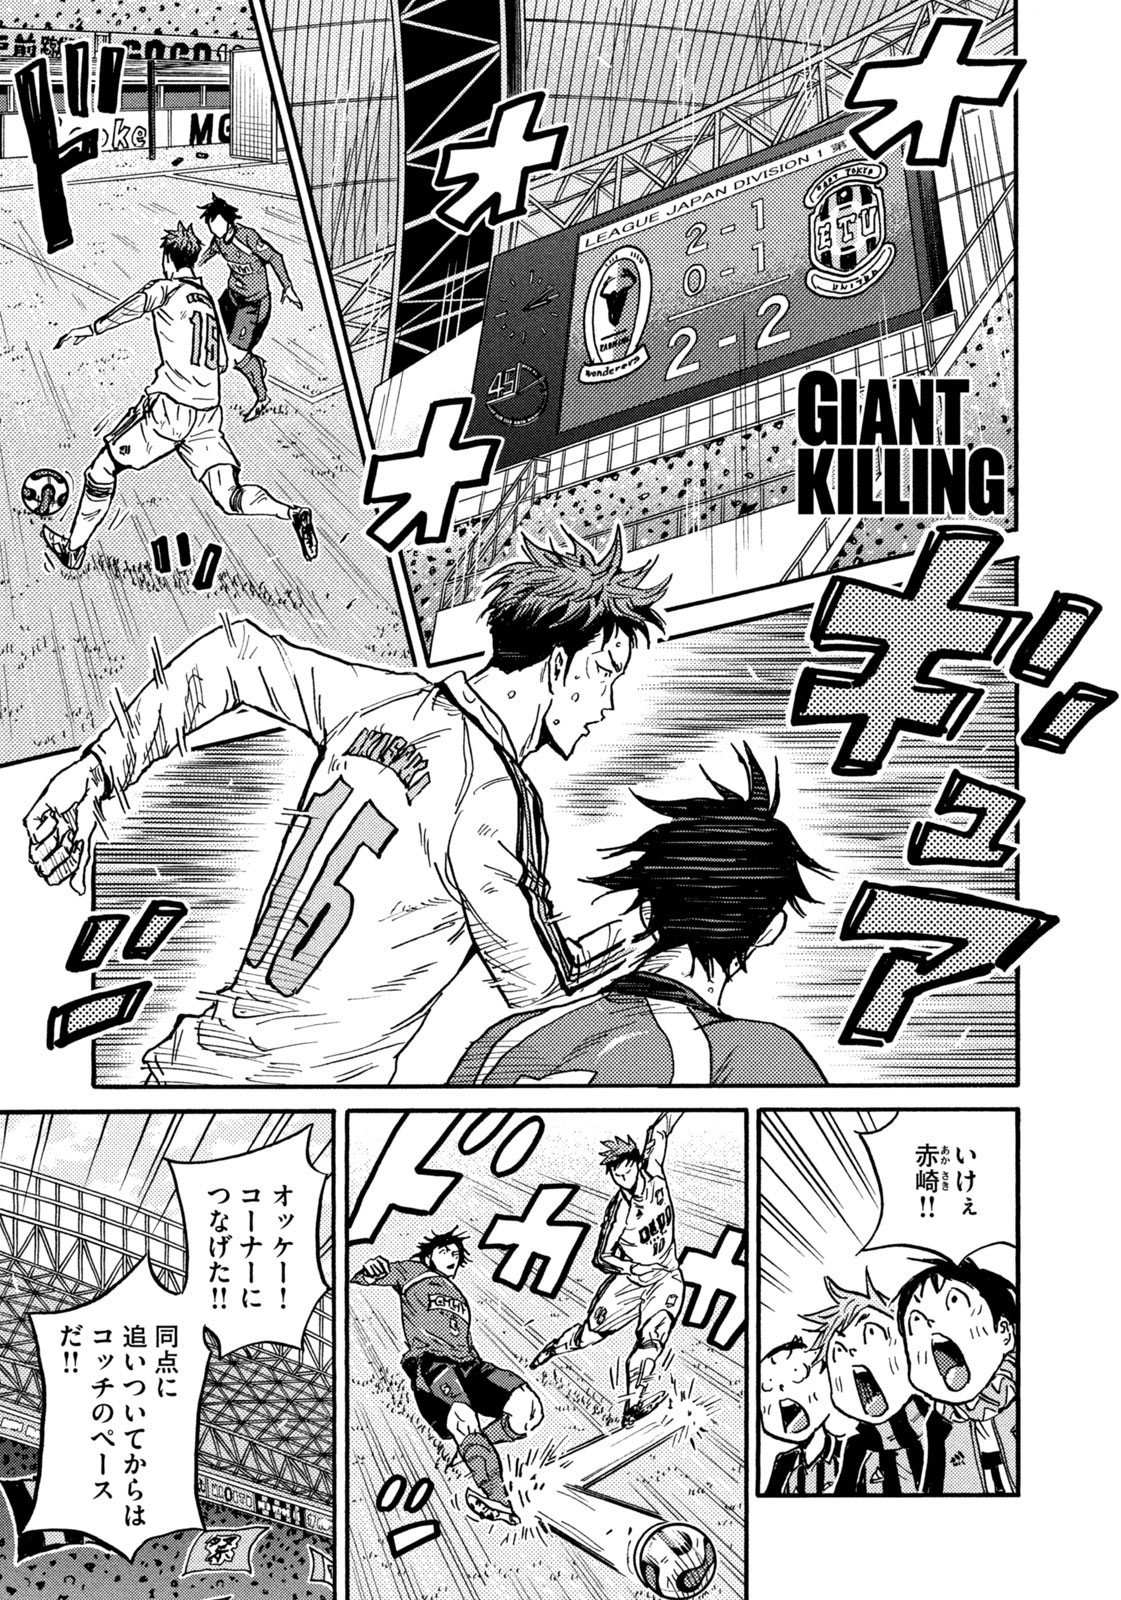 Giant Killing - Chapter 634 - Page 1